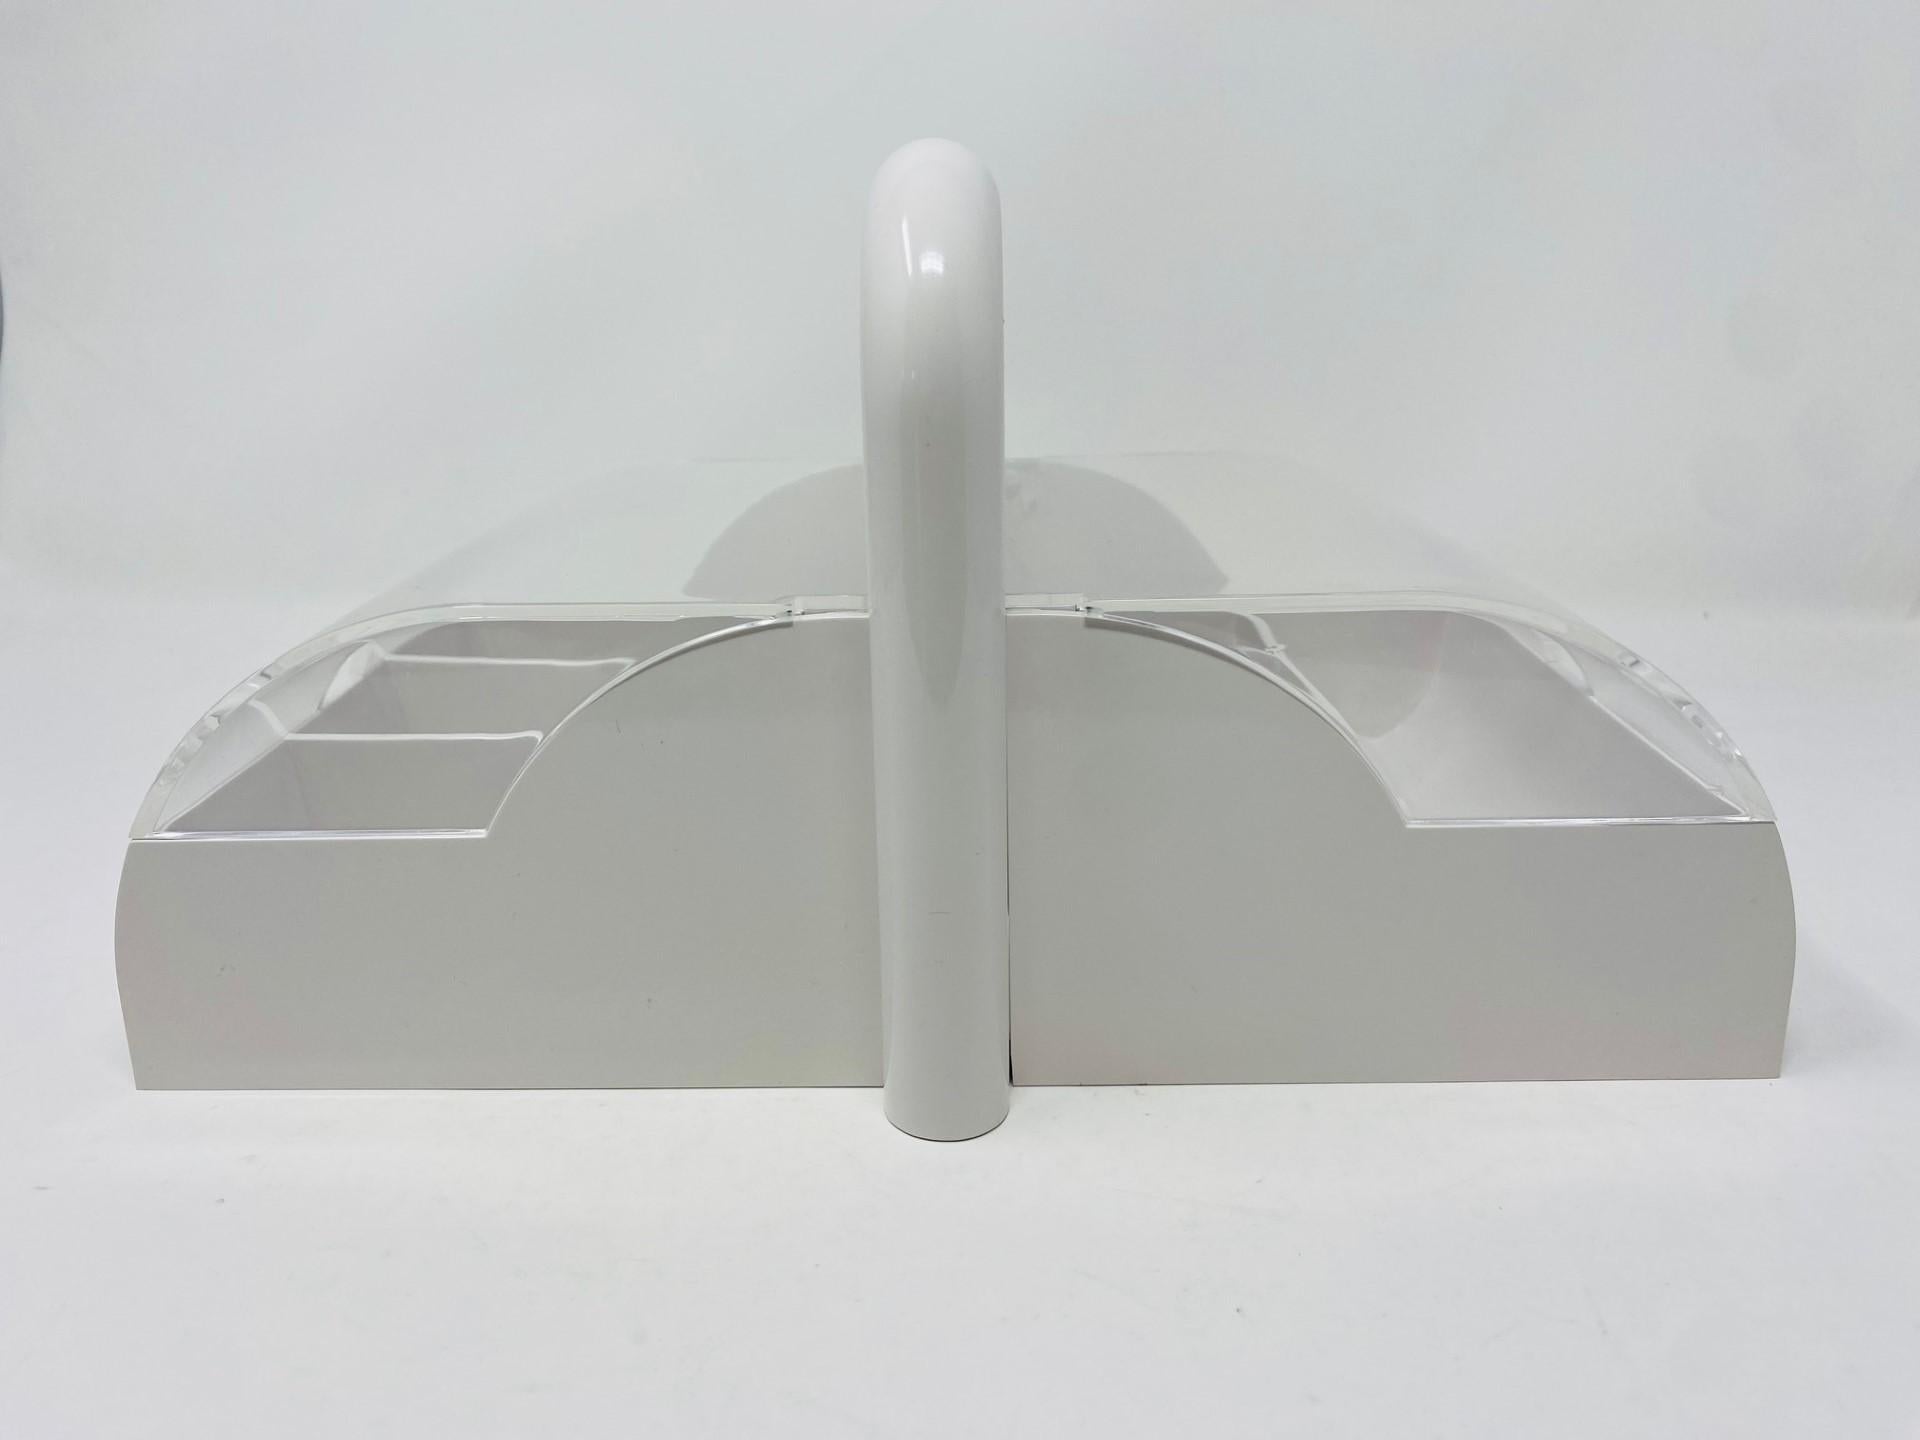 Vintage 1980s Guzzini Cutlery Holder by Furio Minuti  Made in Italy For Sale 1